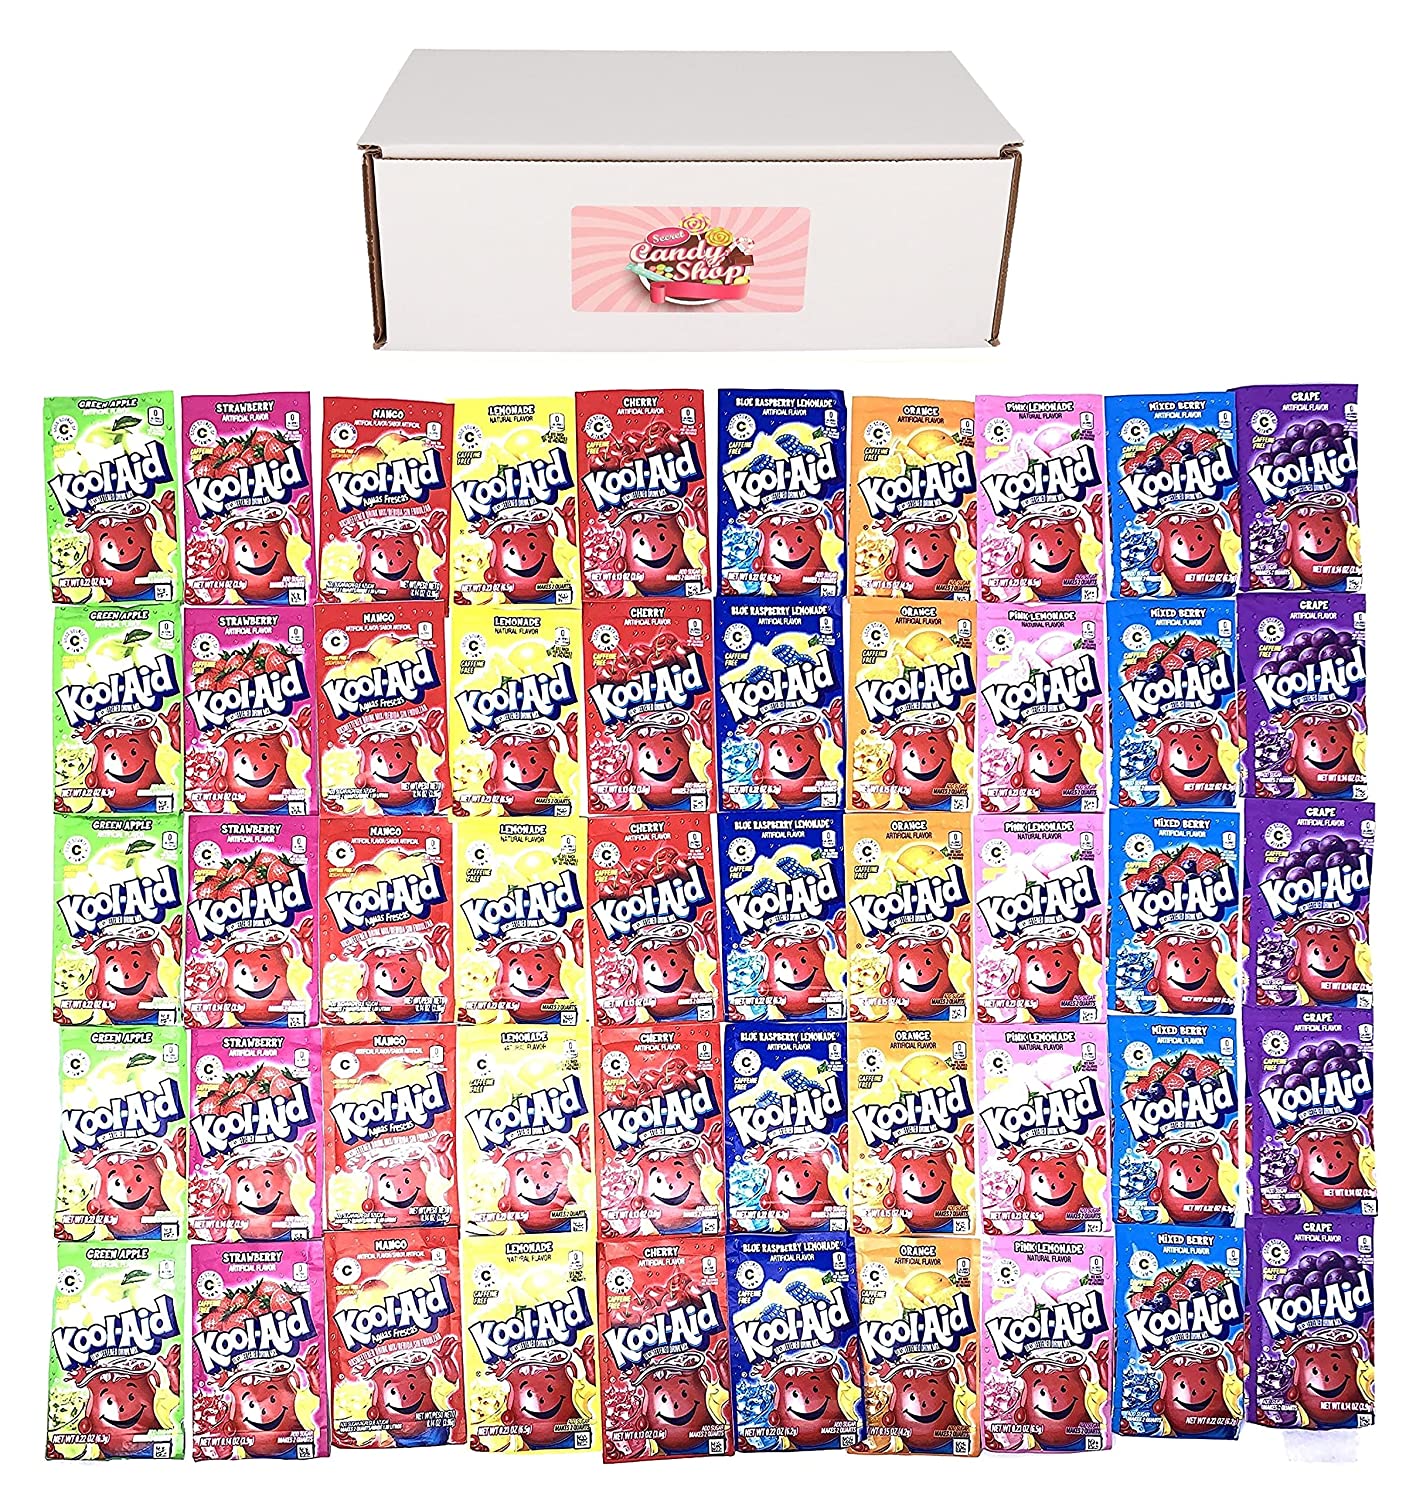 Kool-Aid Drink Mix Packets Variety Pack of 10 Flavors (5 of each flavor, Total of 50)